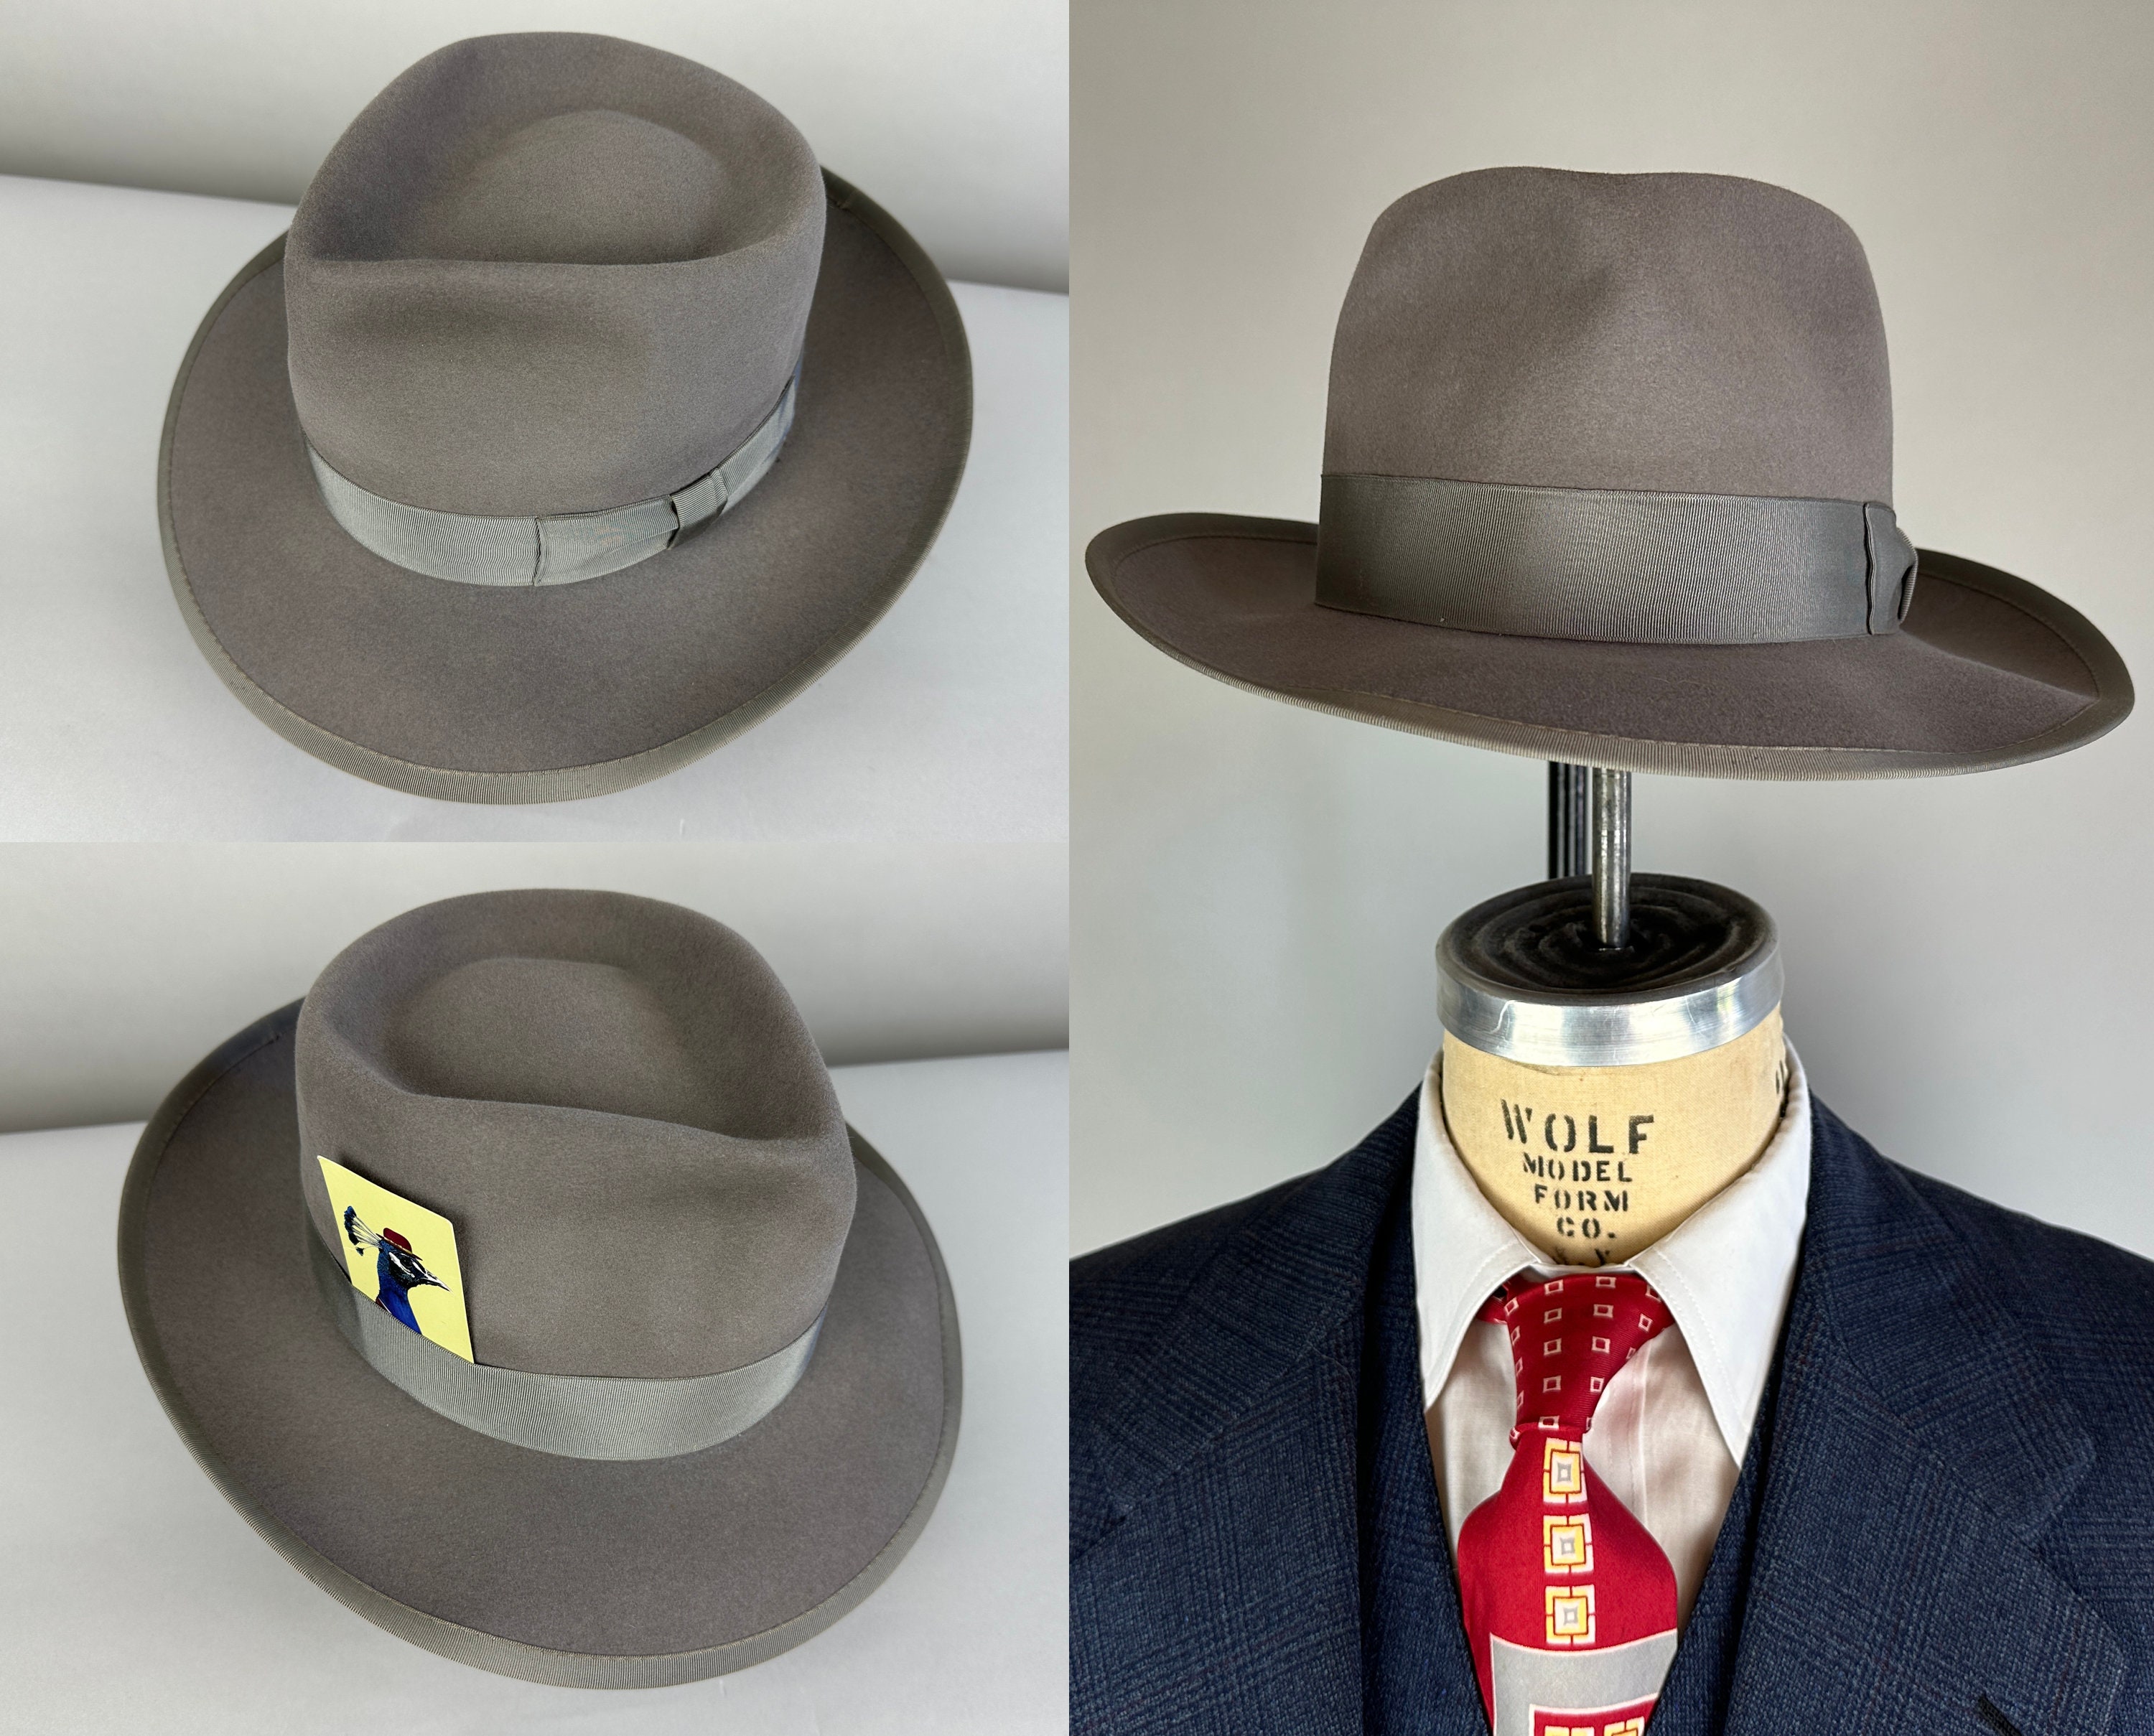 1940s Silver Fox Fedora | Vintage 40s Dove Grey Beaver Felt Hat with  Grosgrain Ribbon Band & Snap Brim Edge Trim by Brent | Size 7 1/4 Large